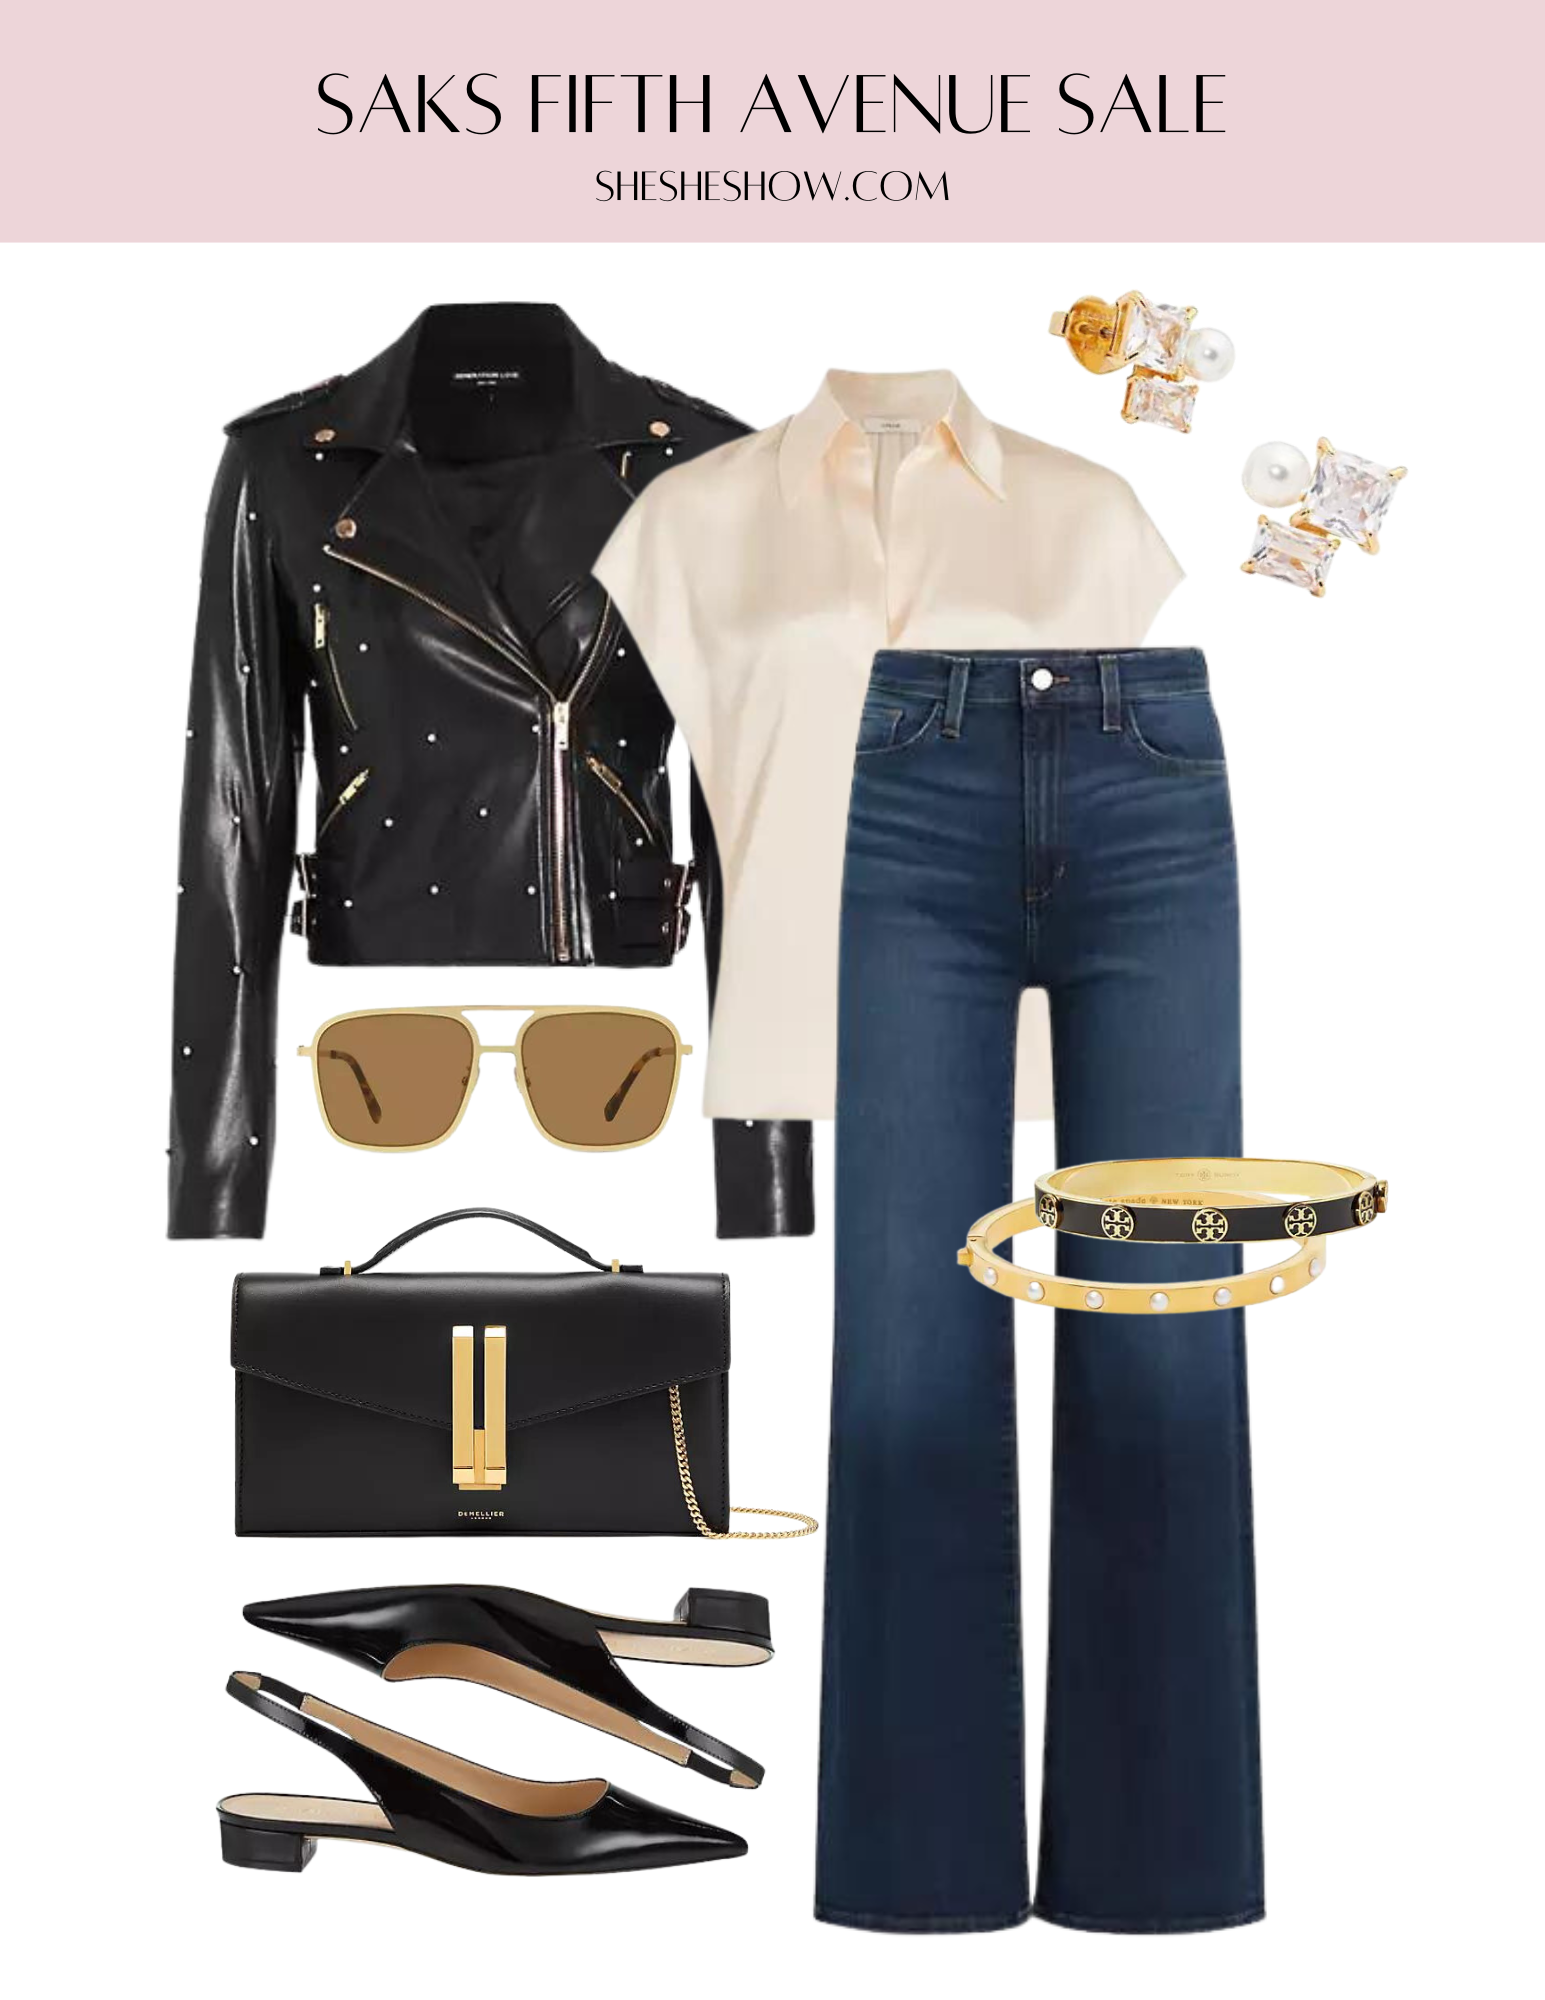 Sak Fifth Avenue Friends and Family Sale Collage of leather jacket, white blouse, jeans, gold sunglasses, black purse, black flats, and jewelry